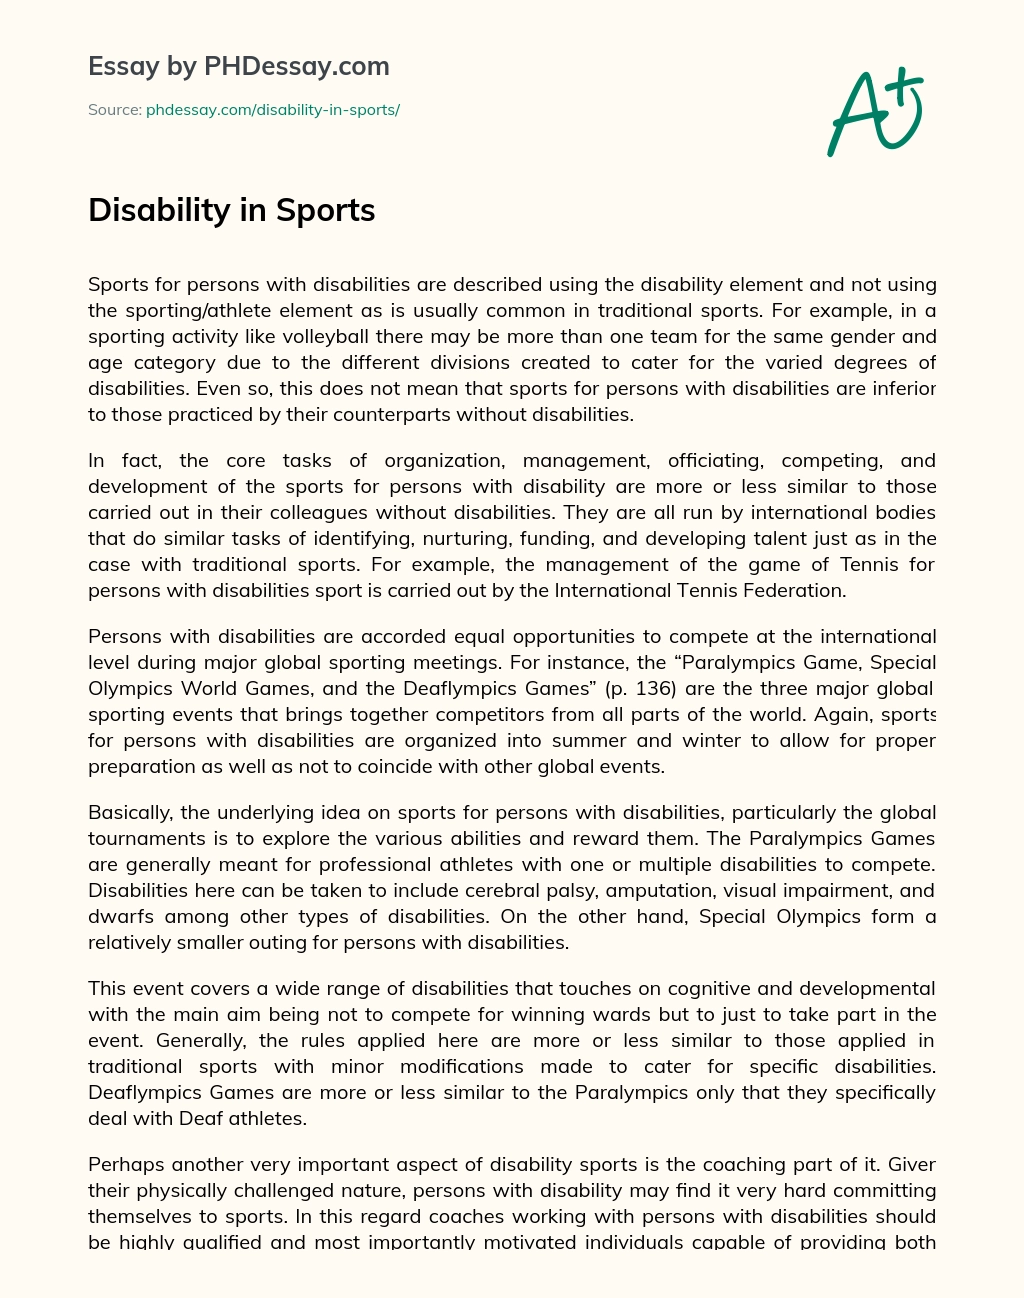 Disability in Sports essay